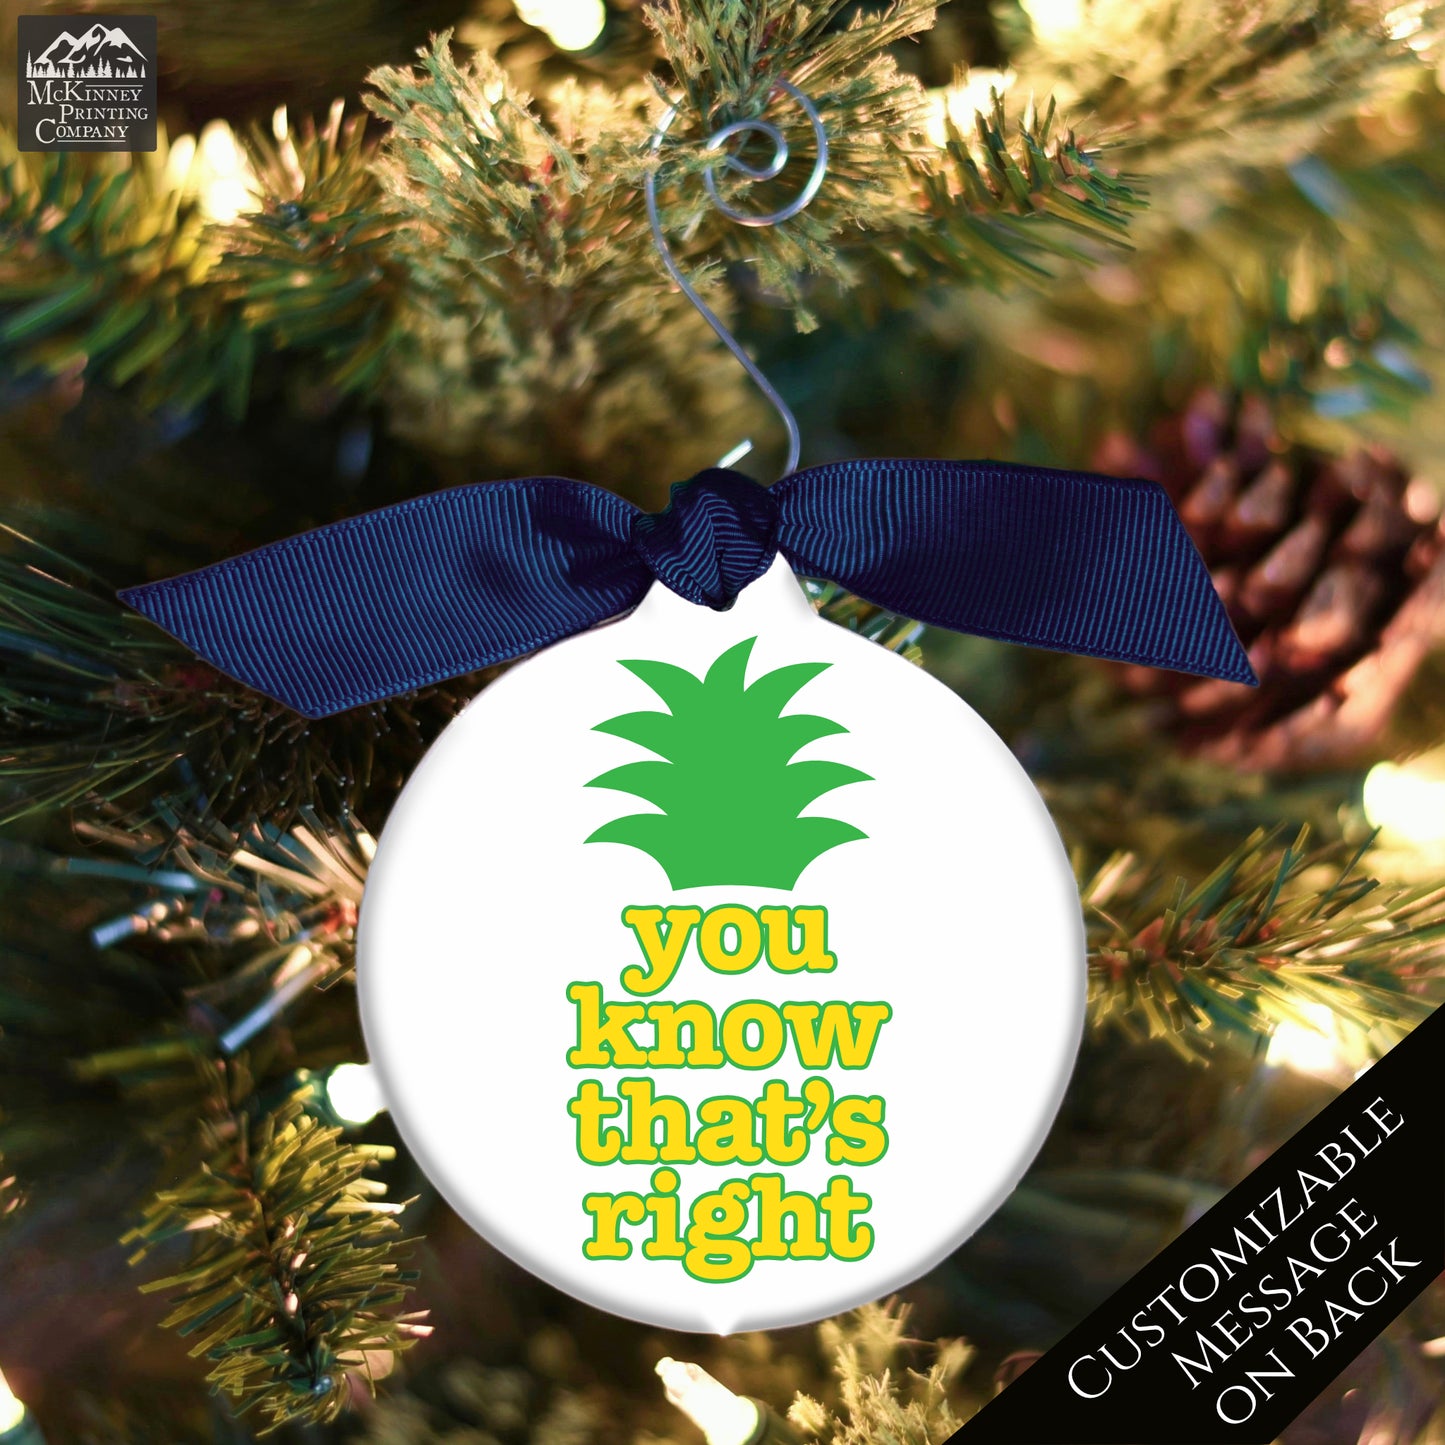 Psych TV Show - Christmas Ornament, Pineapple, Shawn, Gus, Quote